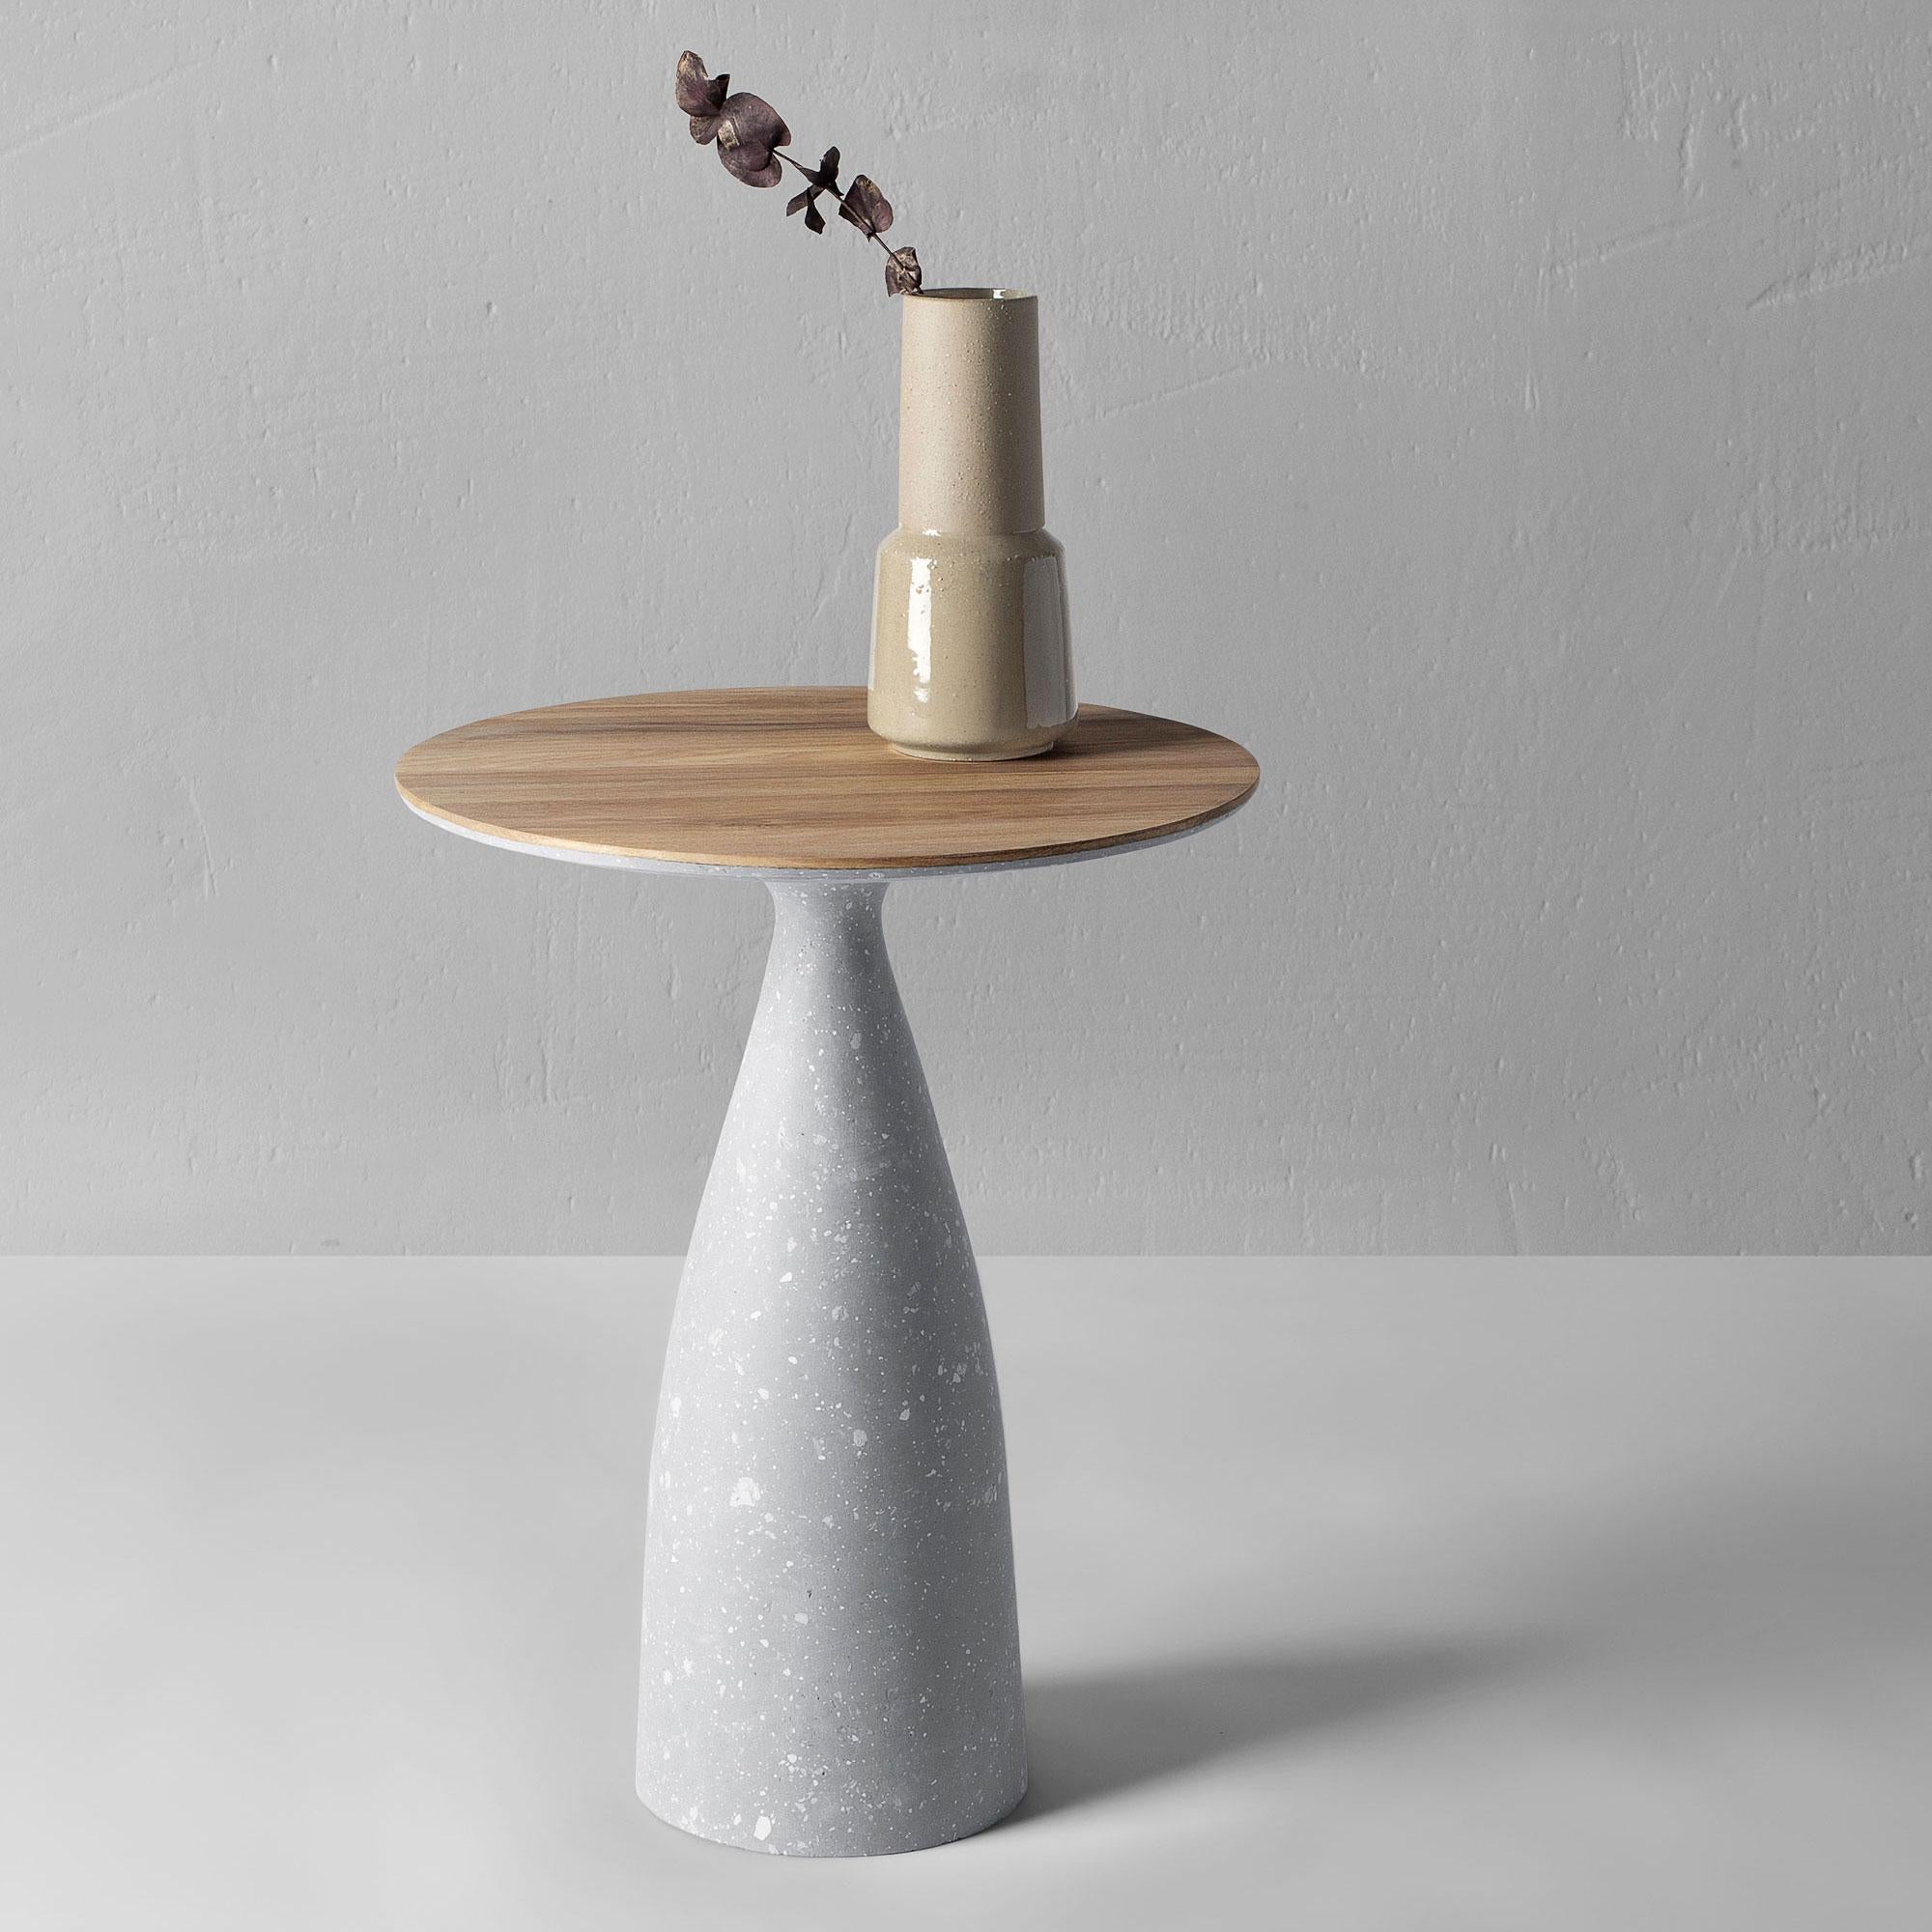 Minimalist side table 45, grey.

The visual inspiration for the side tables is a combination of natural wood and concrete. These two opposite materials combined, create a unique character of the product that has the coldness of concrete and the